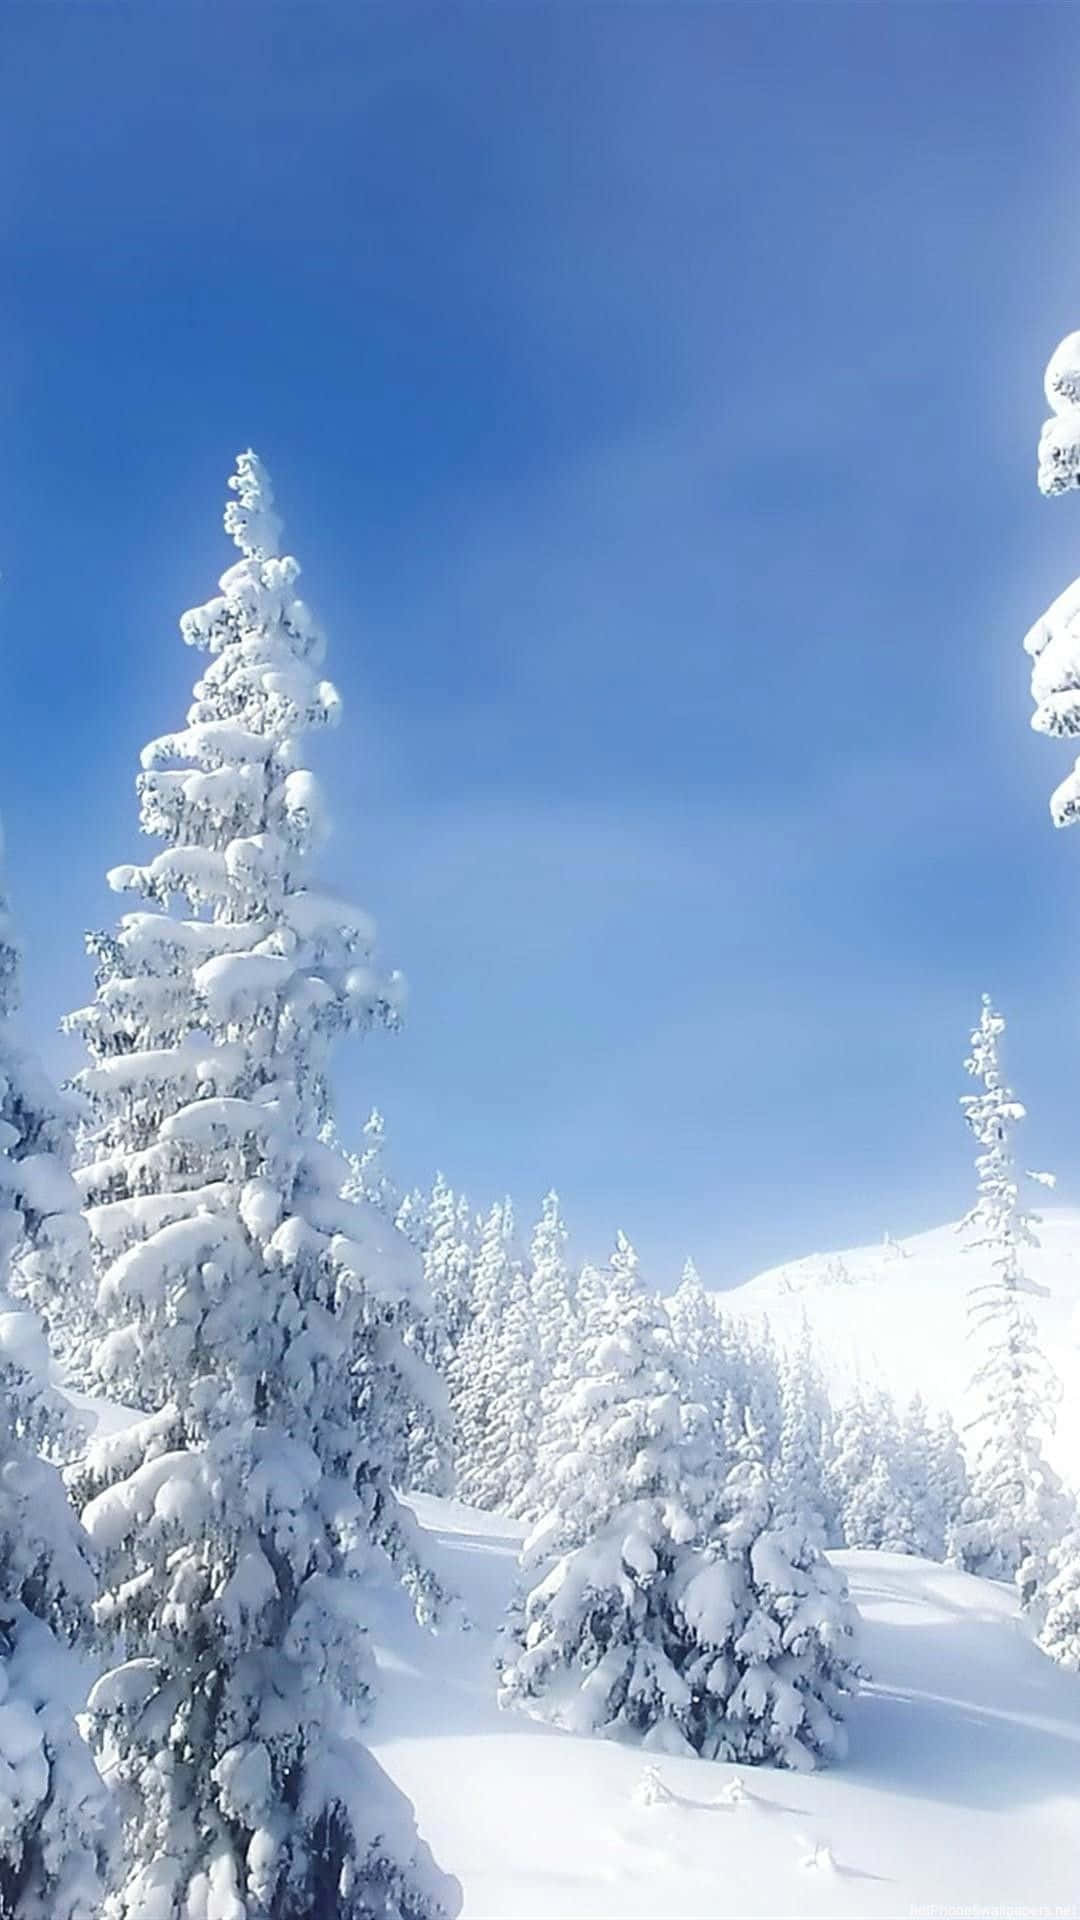 A Snow Covered Mountain With Blue Sky Background